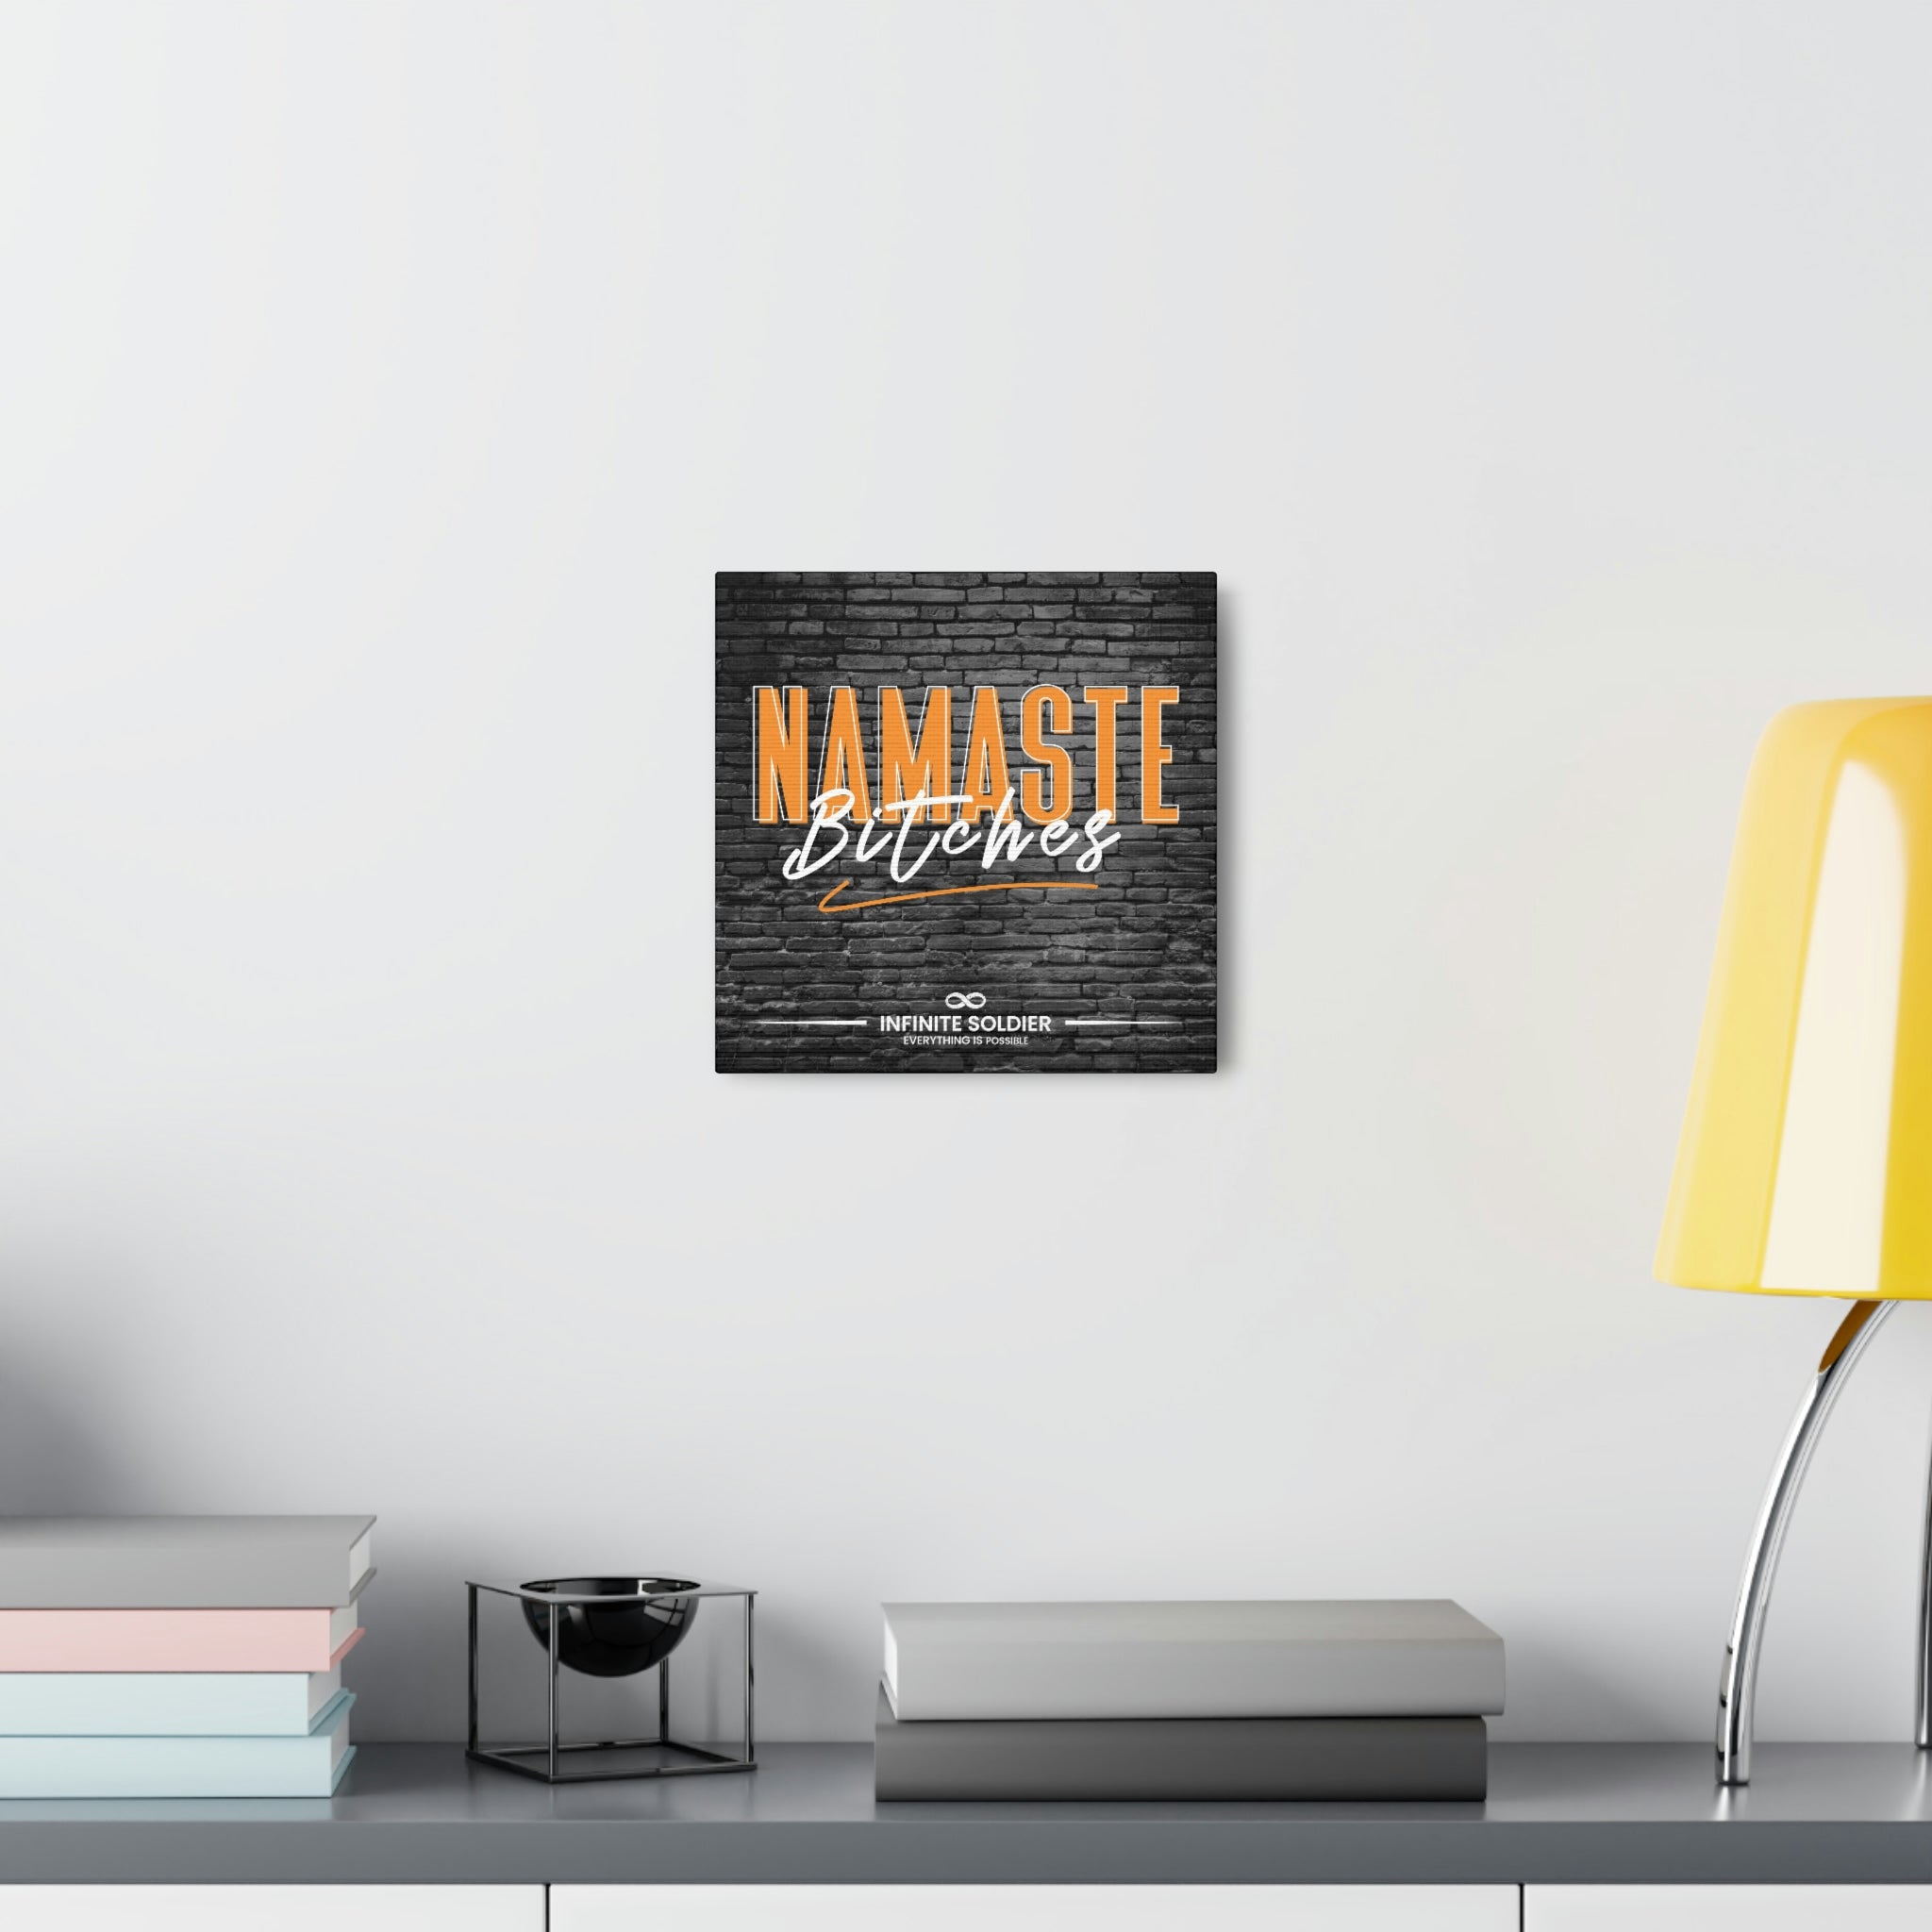 Namaste Bitches - Funny Greeting Cool Canvas Poster | Infinite Soldier